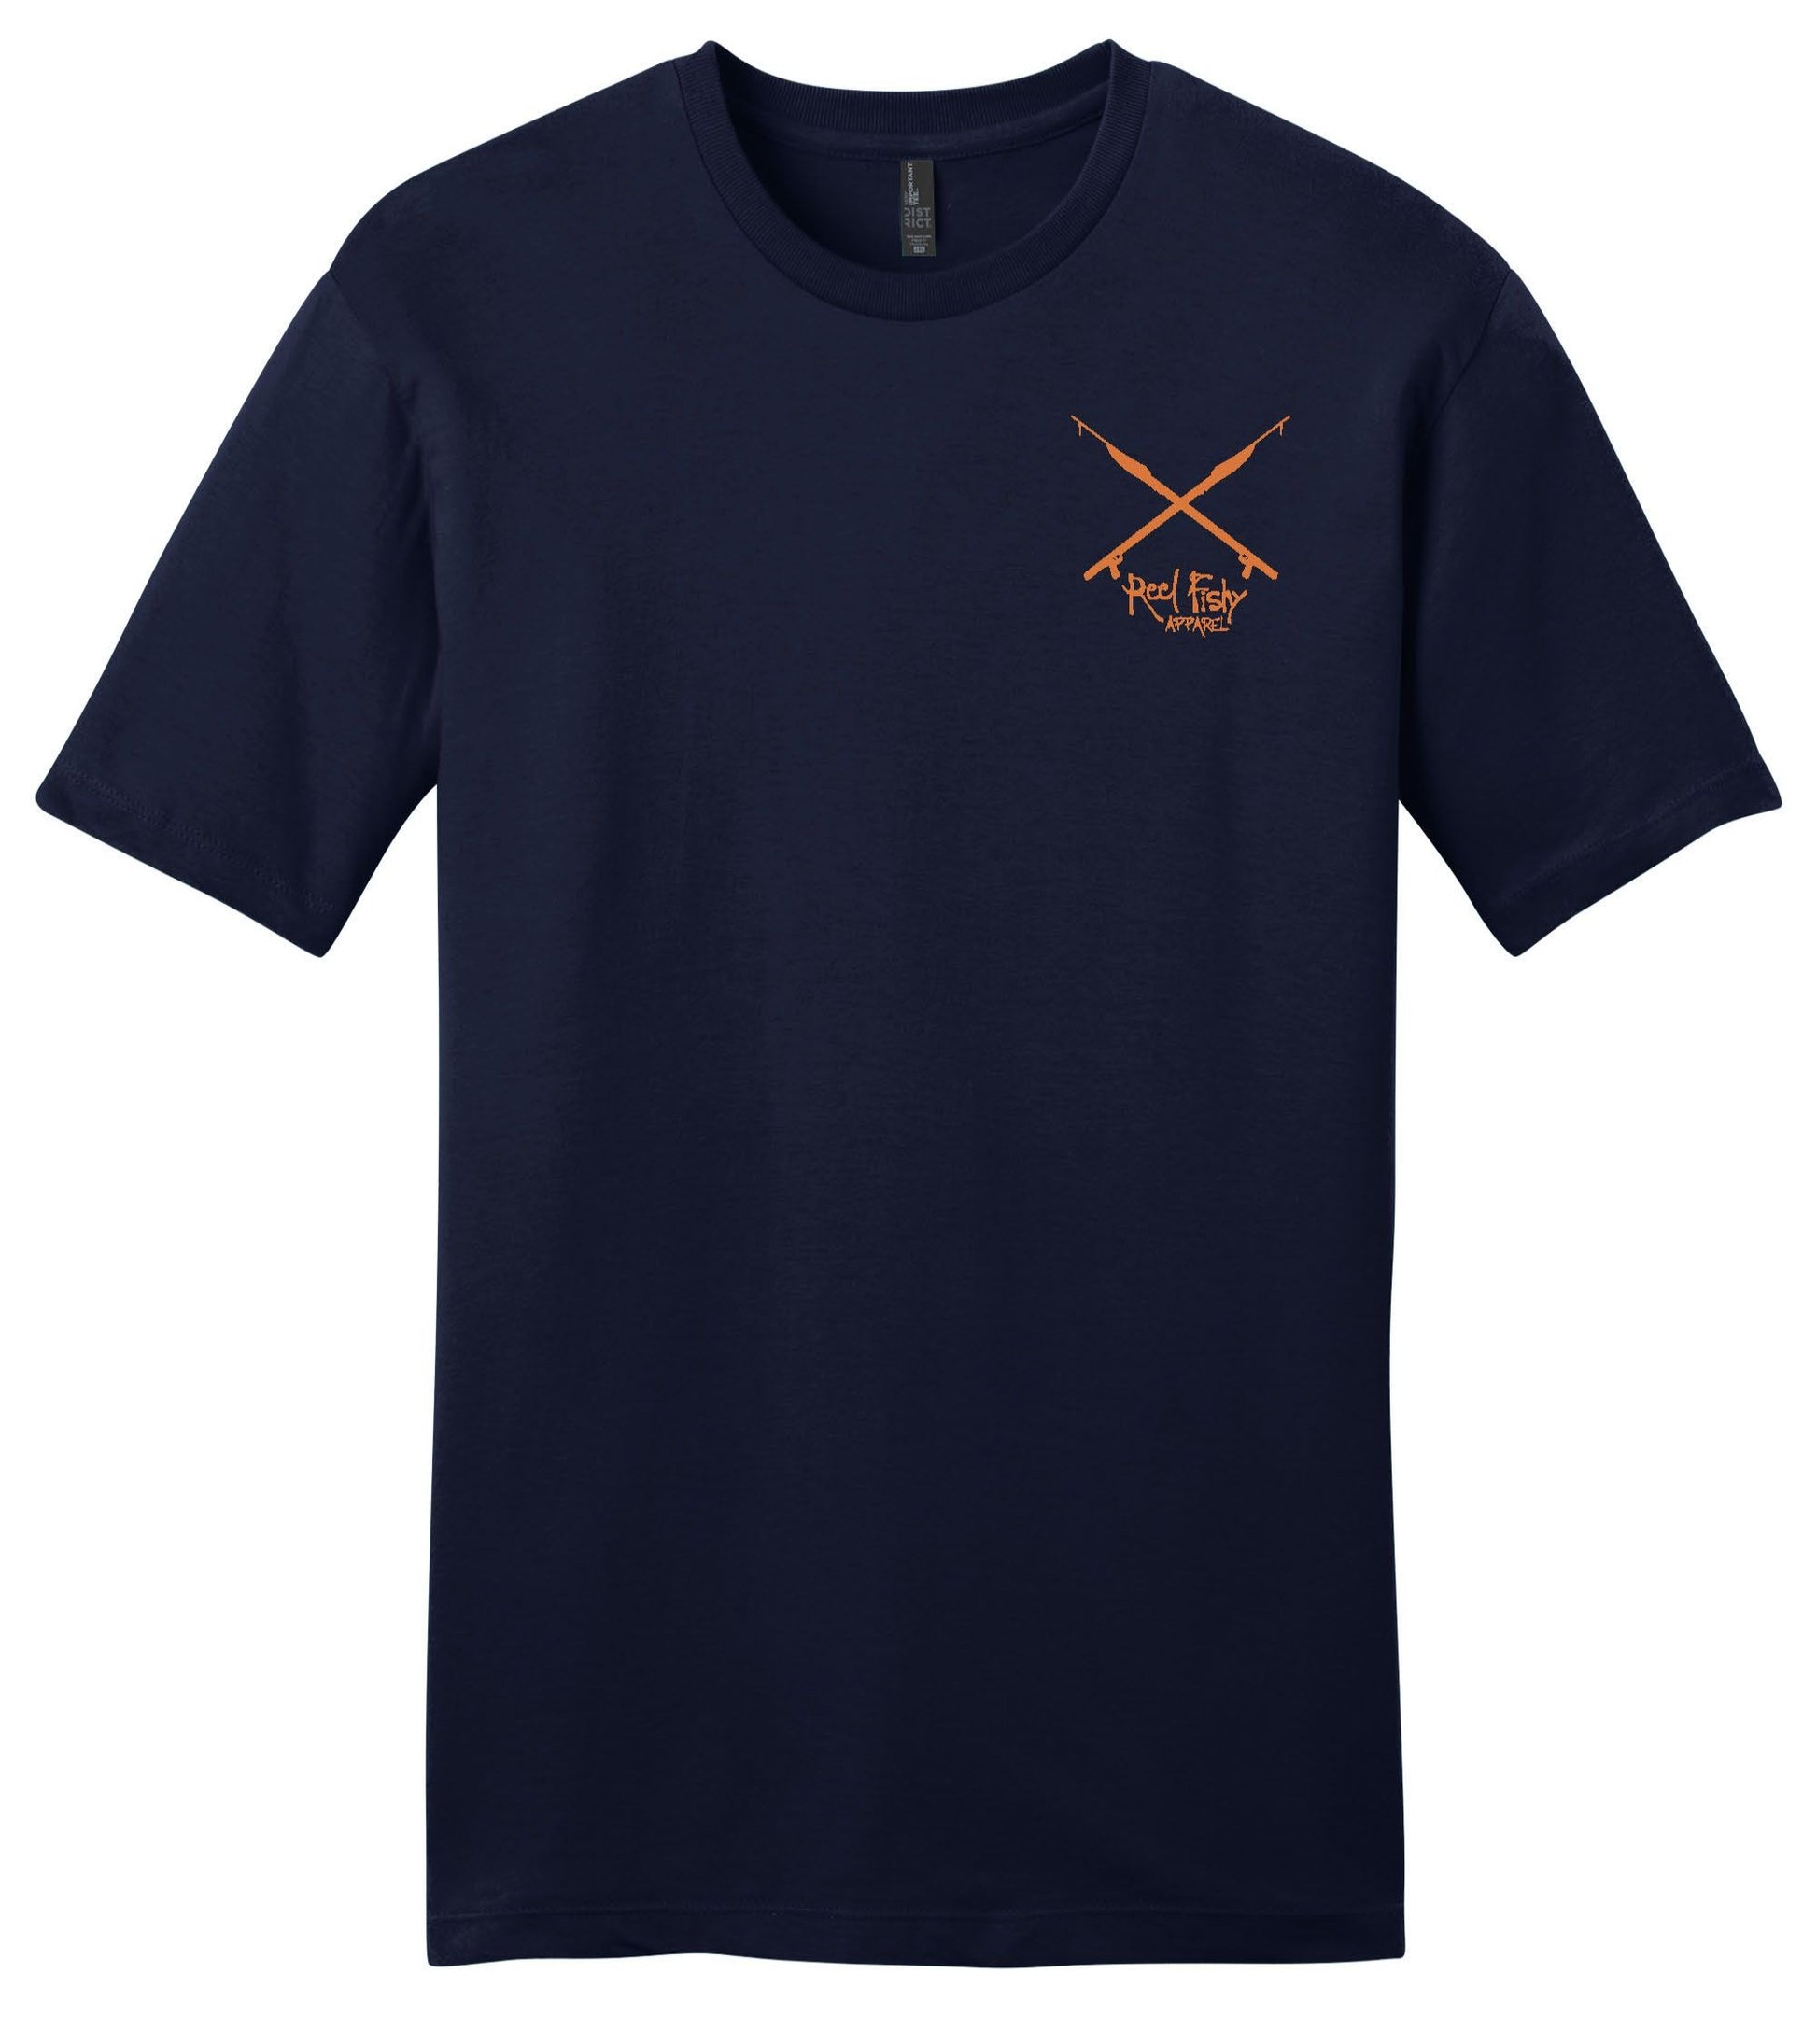 Navy Octopus Crew T-shirt Short Sleeve - Front with Spear Reel Fishy Apparel logo